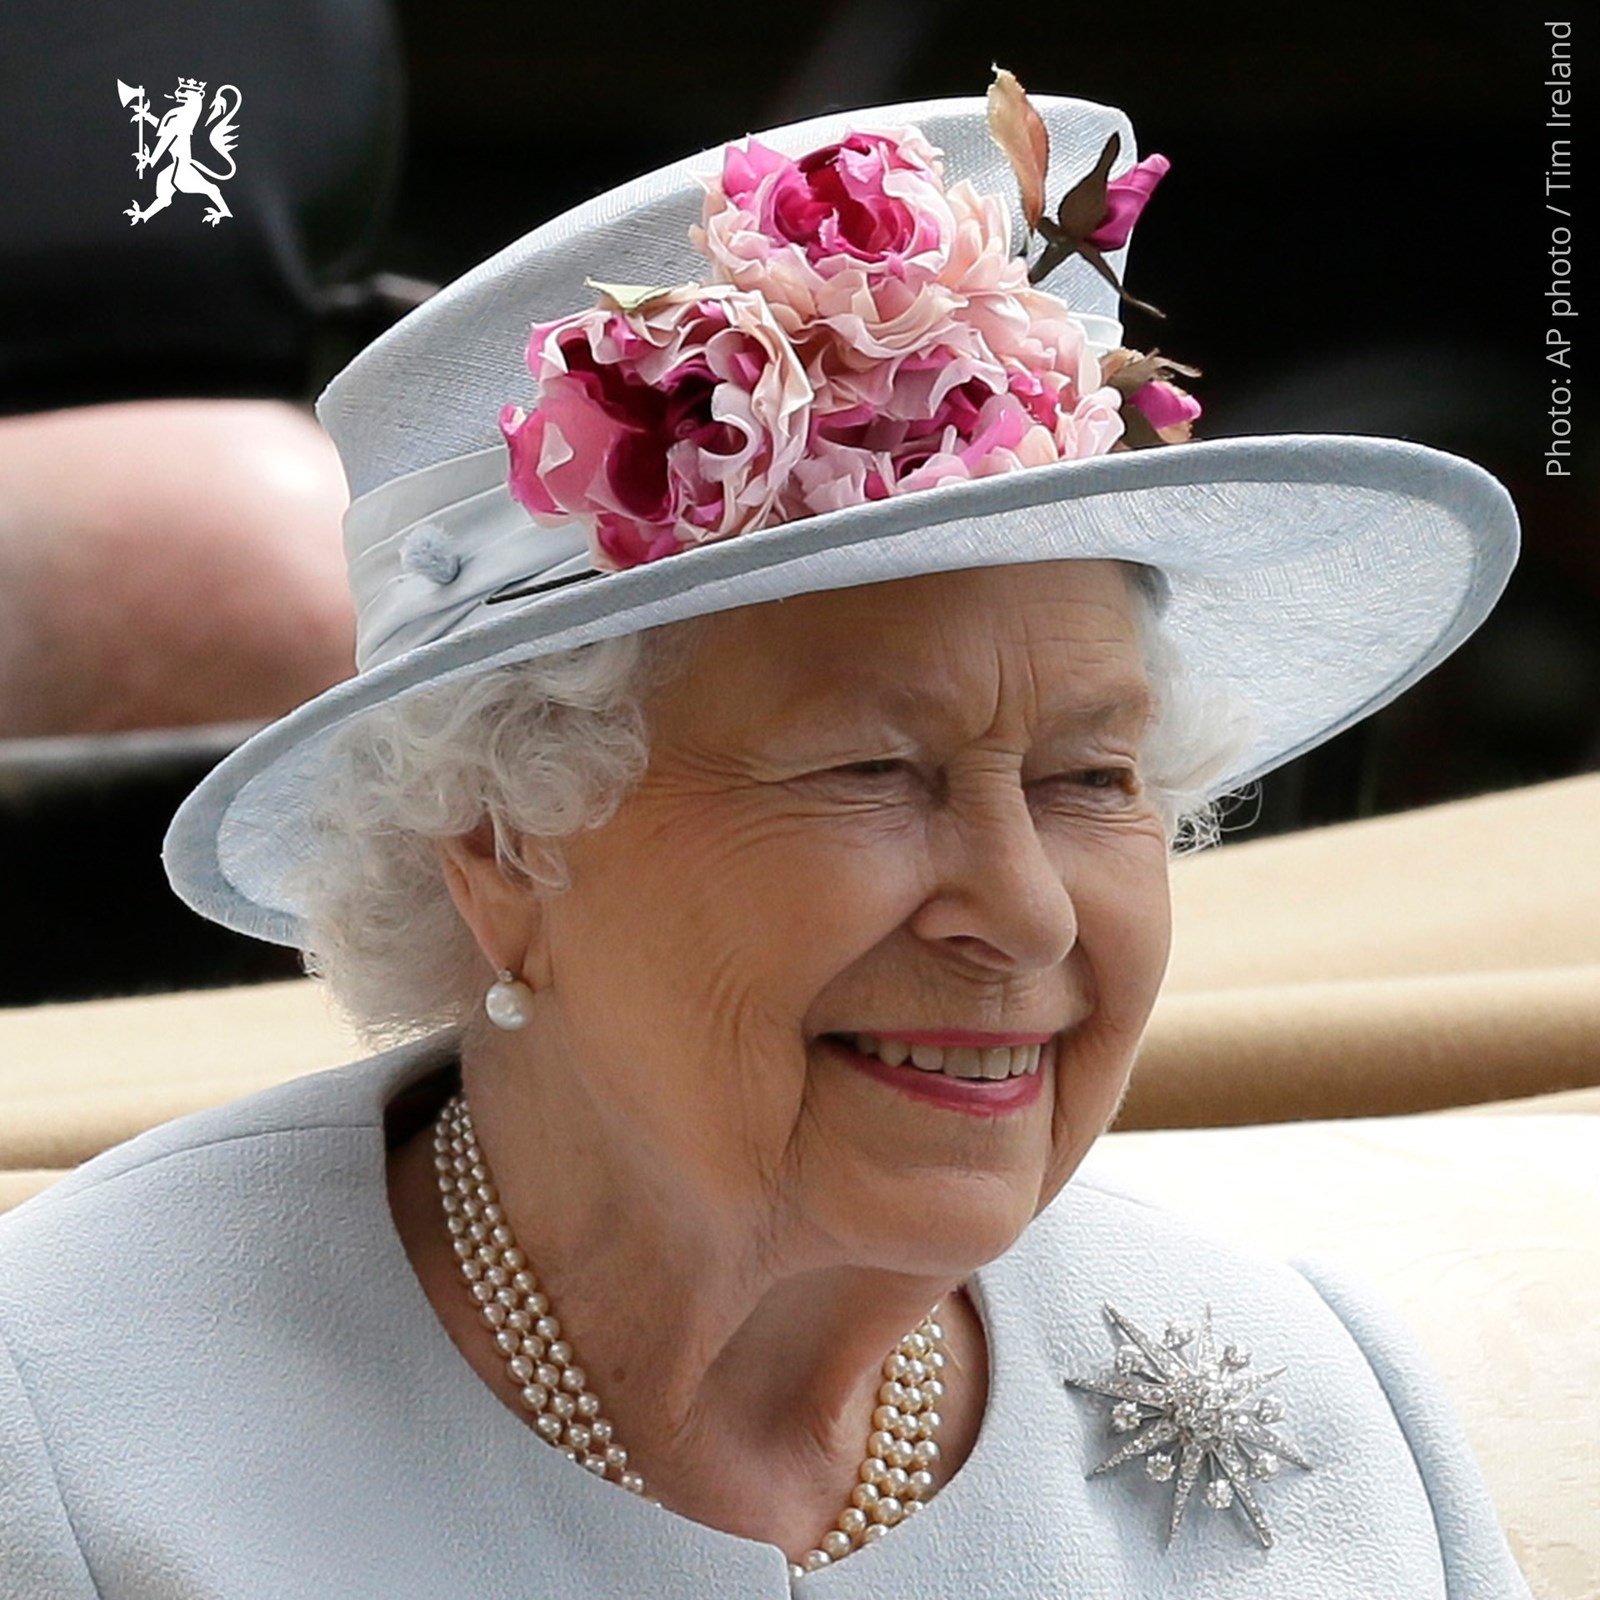 Statement from the Prime Minister regarding the death of Queen Elizabeth II